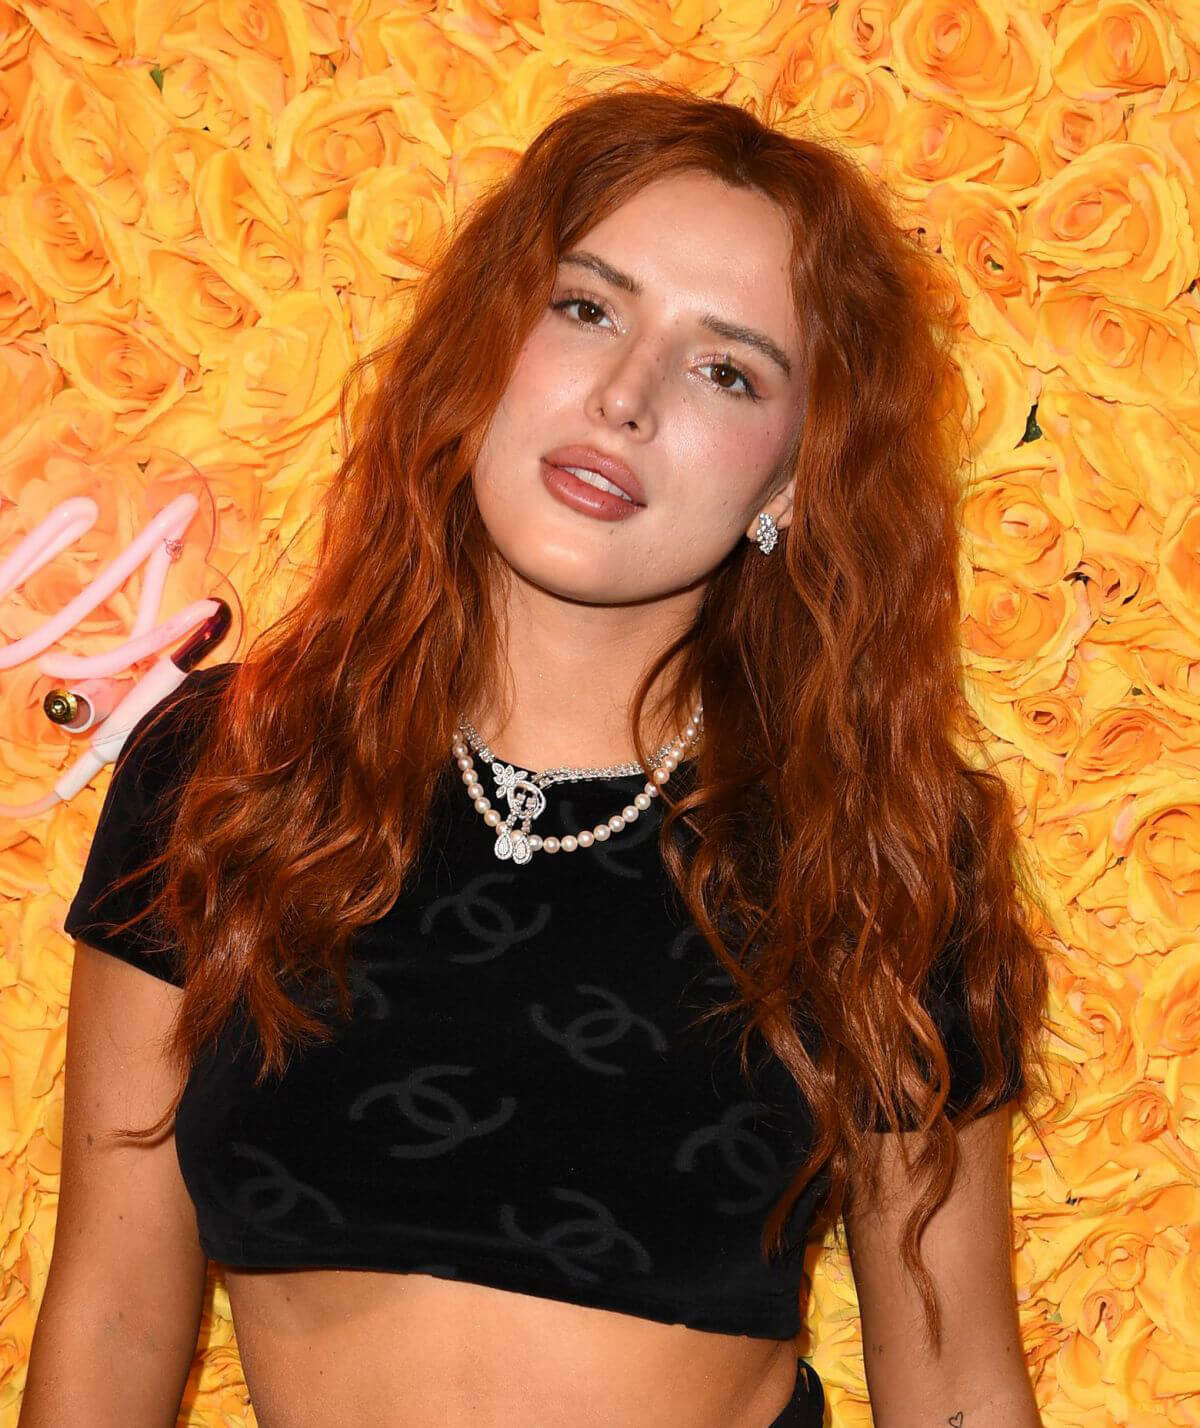 Bella Thorne Flashes Her Toned Midriff in Crop Top as She Hosts DJ Set and Listening Party at Sugar Factory in Miami 03/11/2021 1